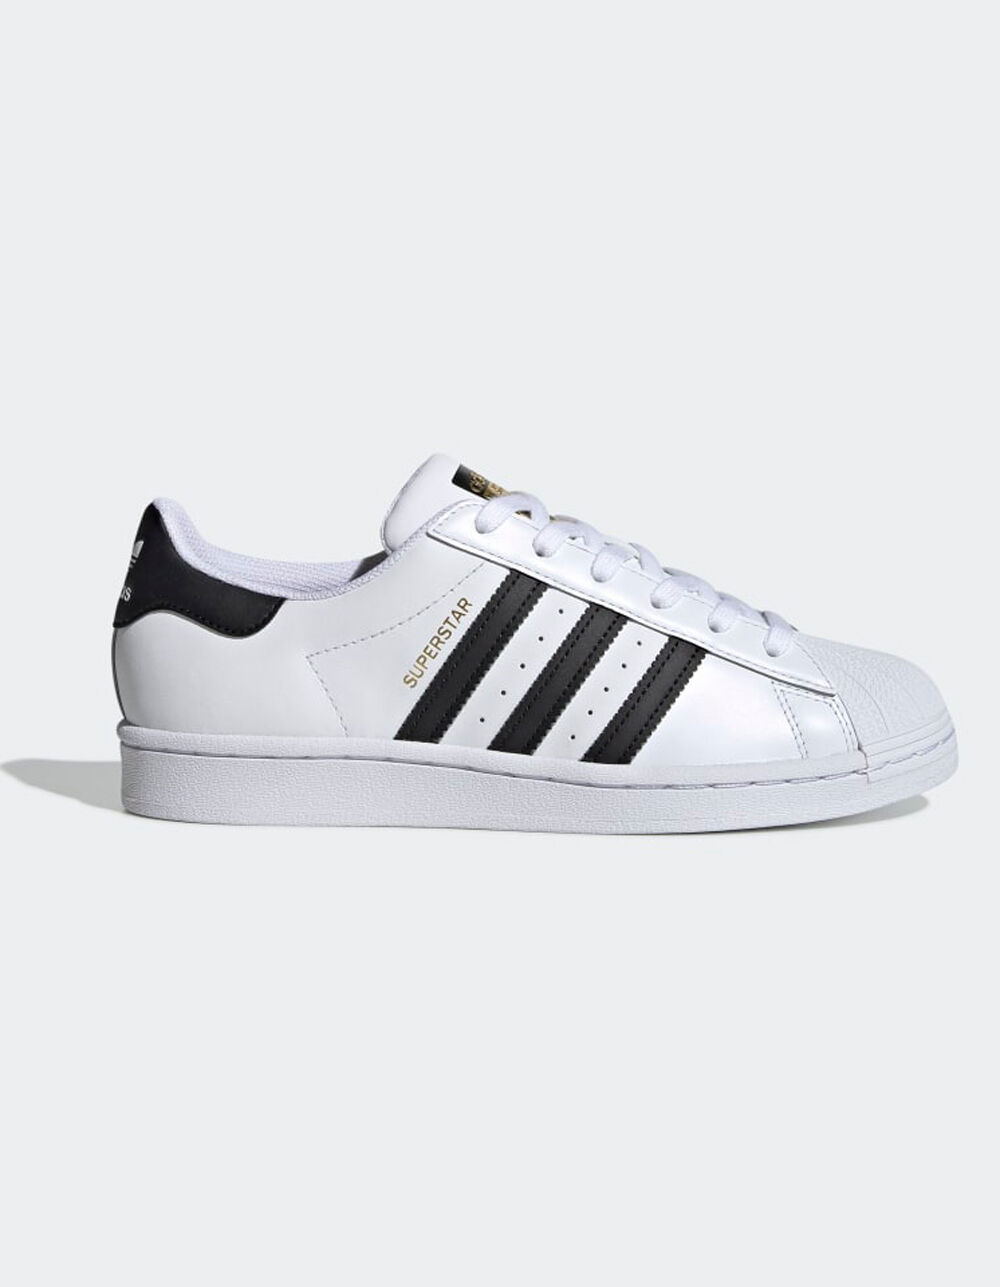 Disguised skin booklet ADIDAS Superstar Womens Shoes - WHITE/BLACK | Tillys